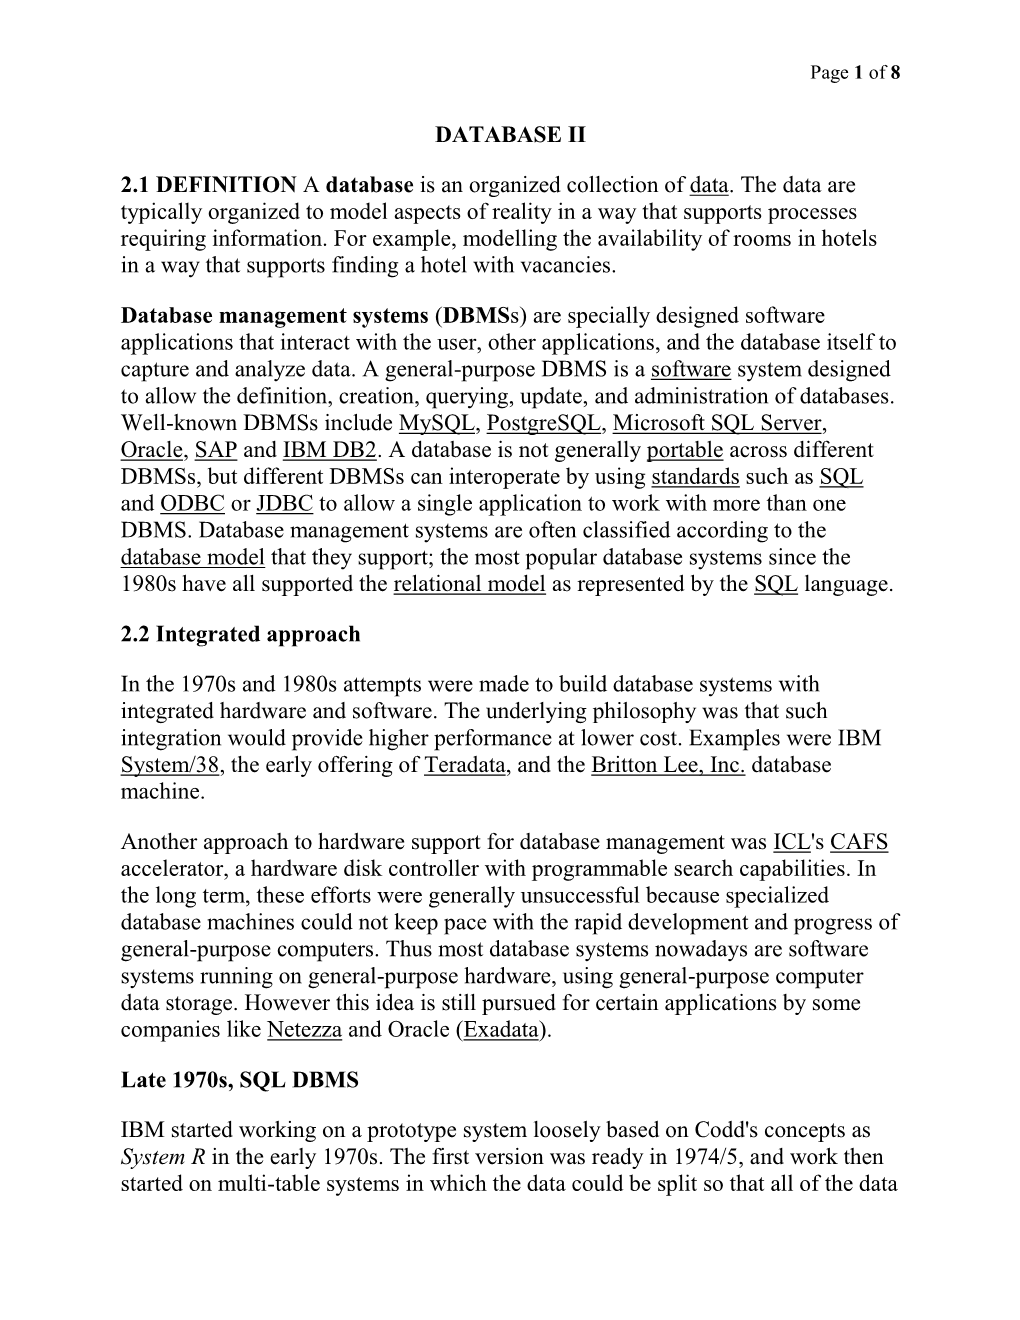 DATABASE II 2.1 DEFINITION a Database Is an Organized Collection